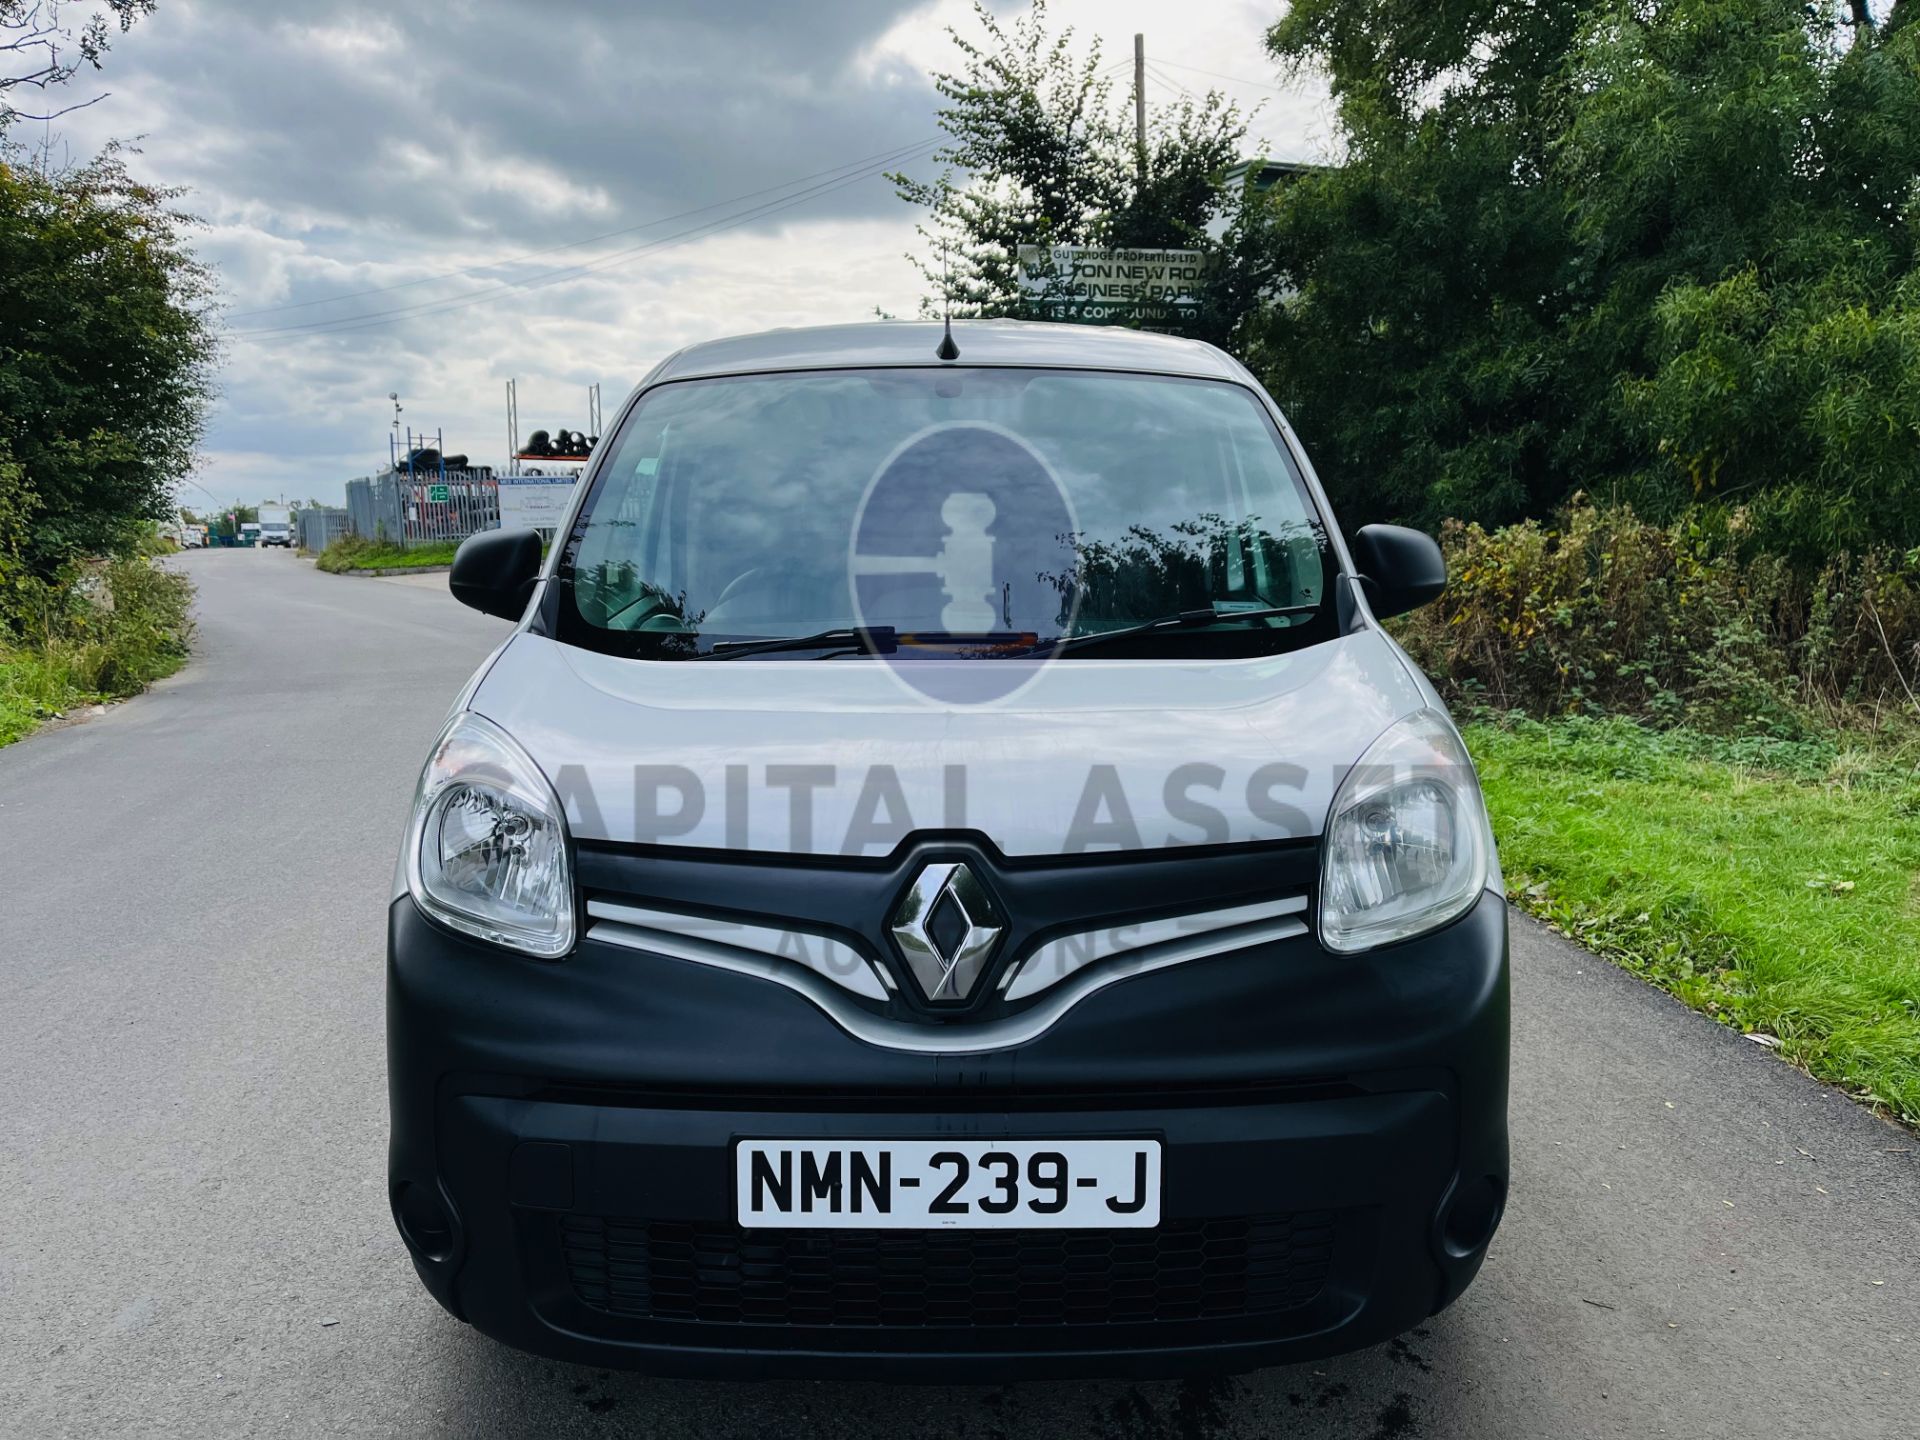 RENAULT KANGOO 1.5DCI "BUSINESS EDITION" 2018 -EURO 6/STOP START (AIR CON) ELEC PACK-TWIN SIDE DOORS - Image 4 of 21